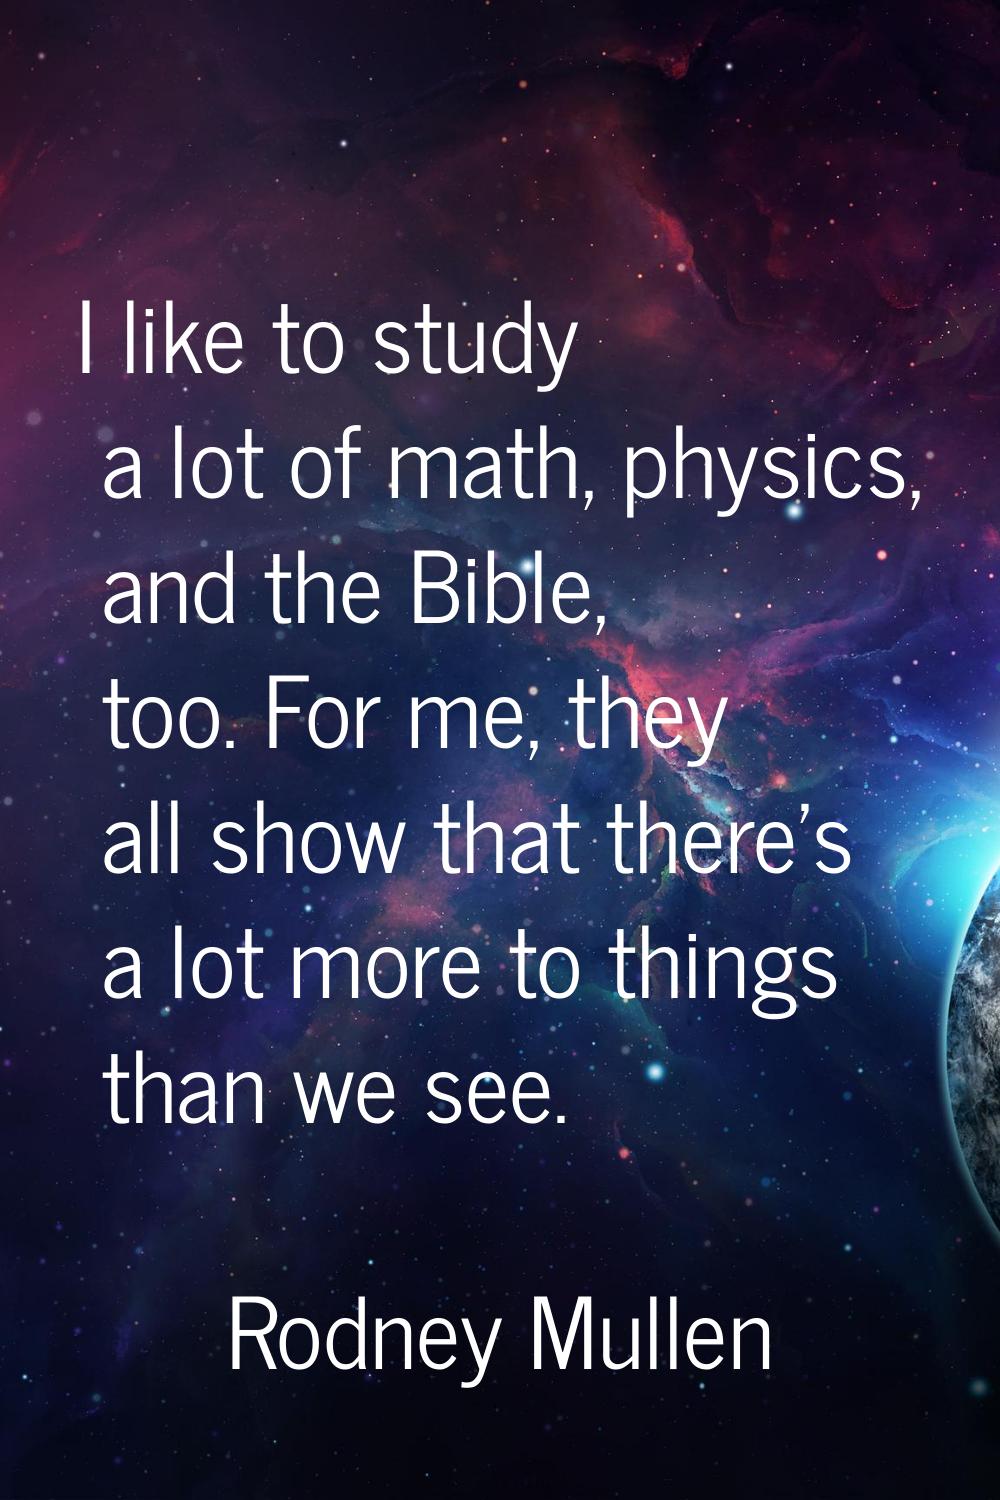 I like to study a lot of math, physics, and the Bible, too. For me, they all show that there's a lo